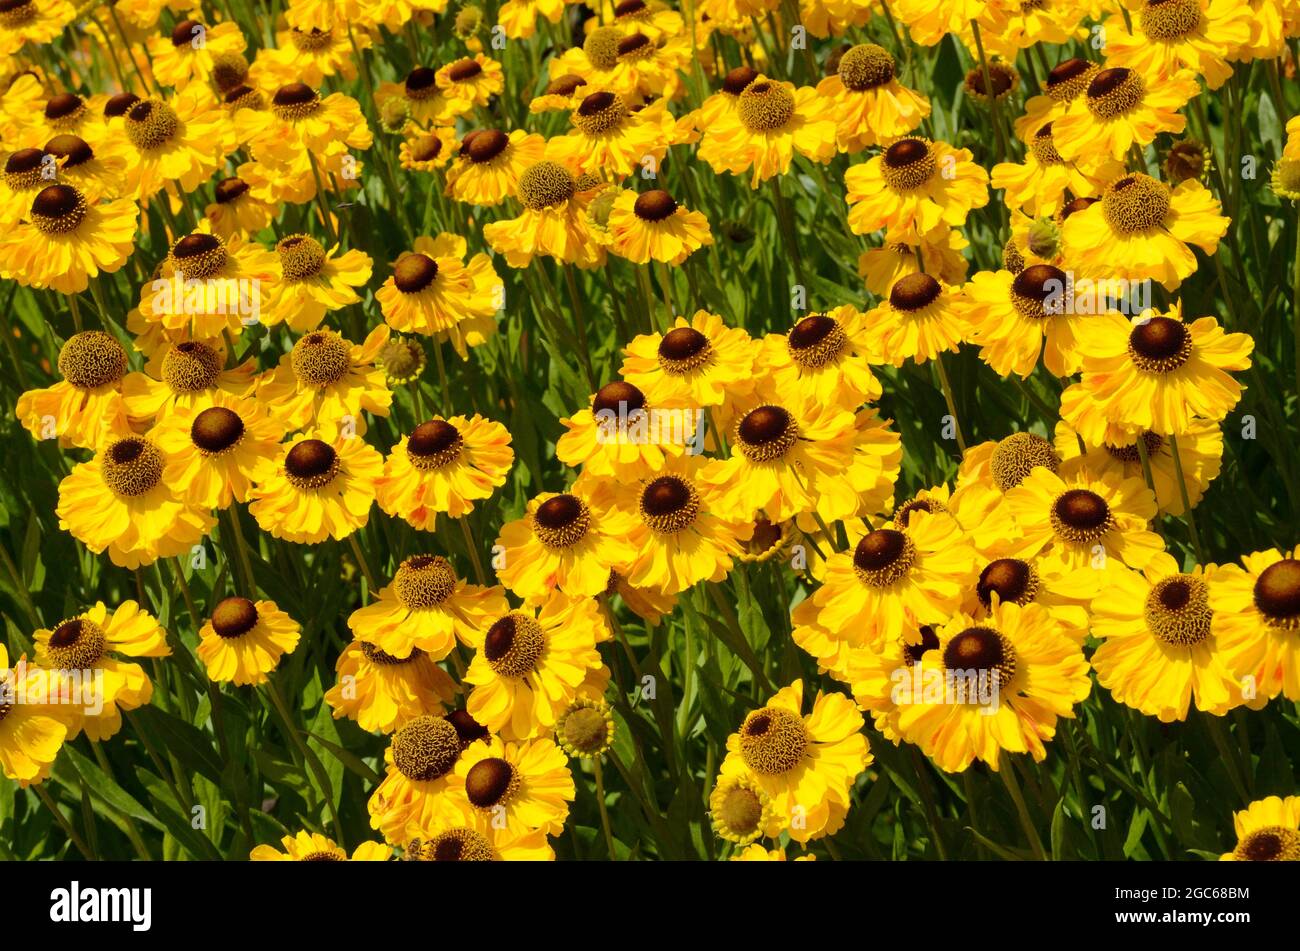 Helenium Pumilum Magnificum Sneezeweed clump forming perennial with profuse large daisy like flowers in summer Stock Photo